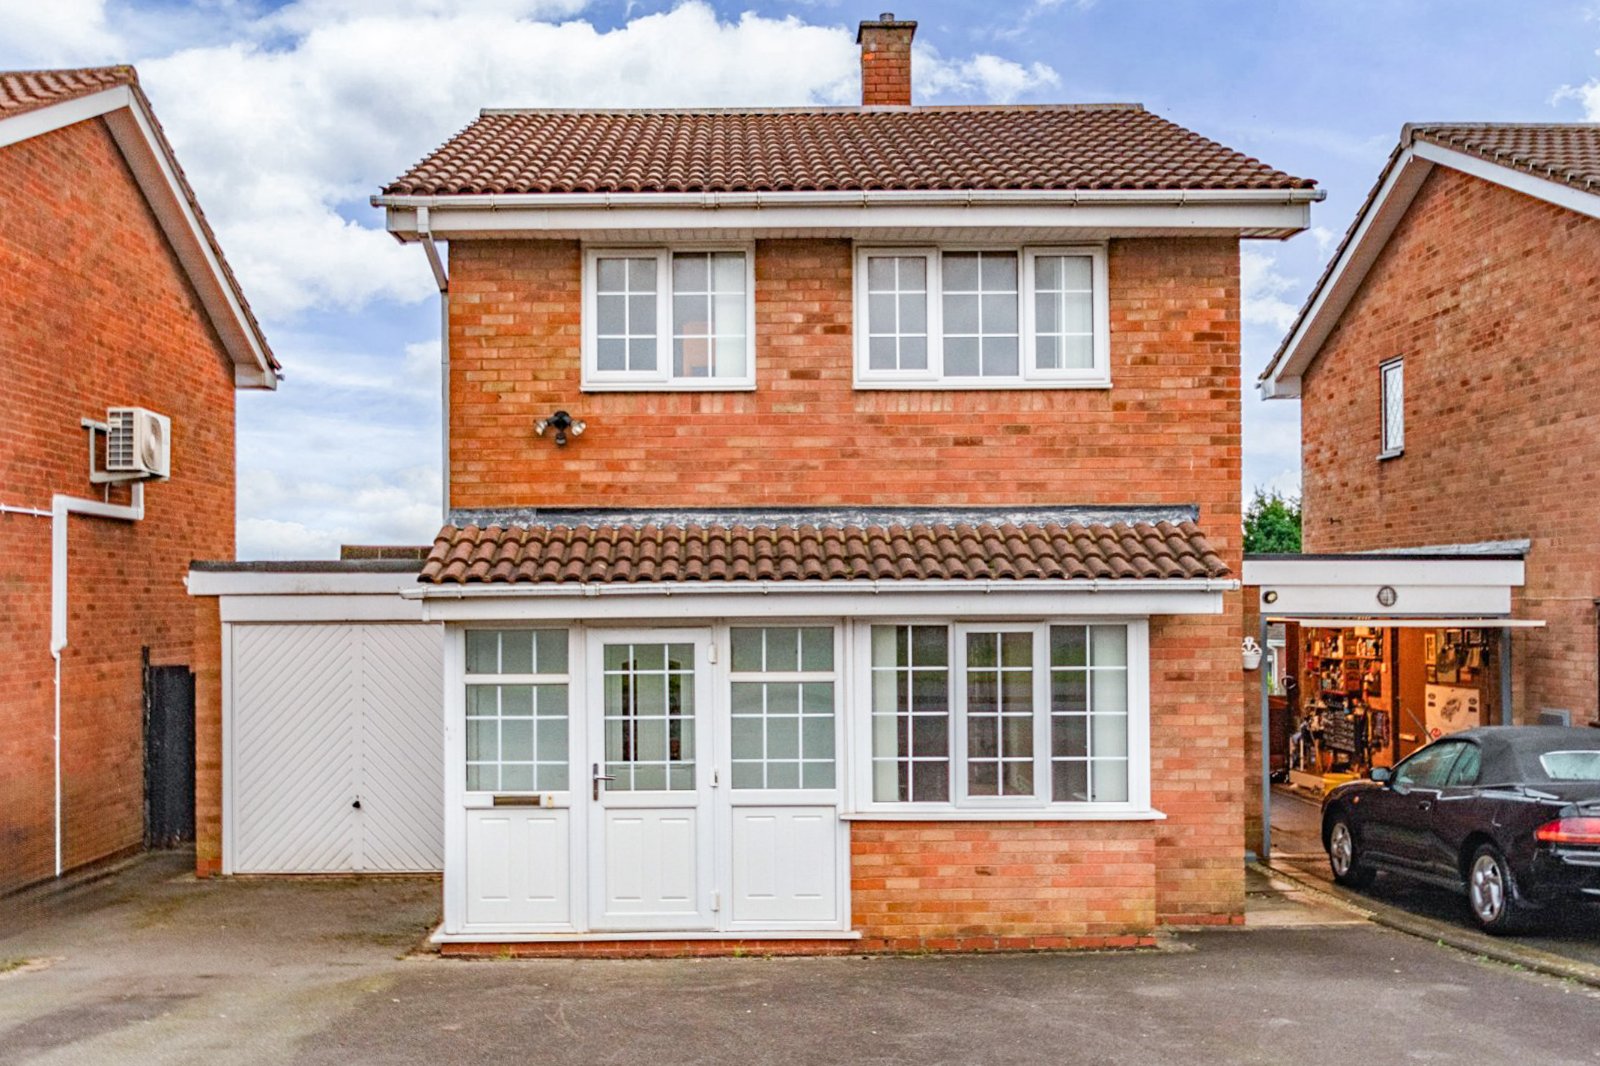 3 bed house for sale in Wadham Close, Rowley Regis - Property Image 1